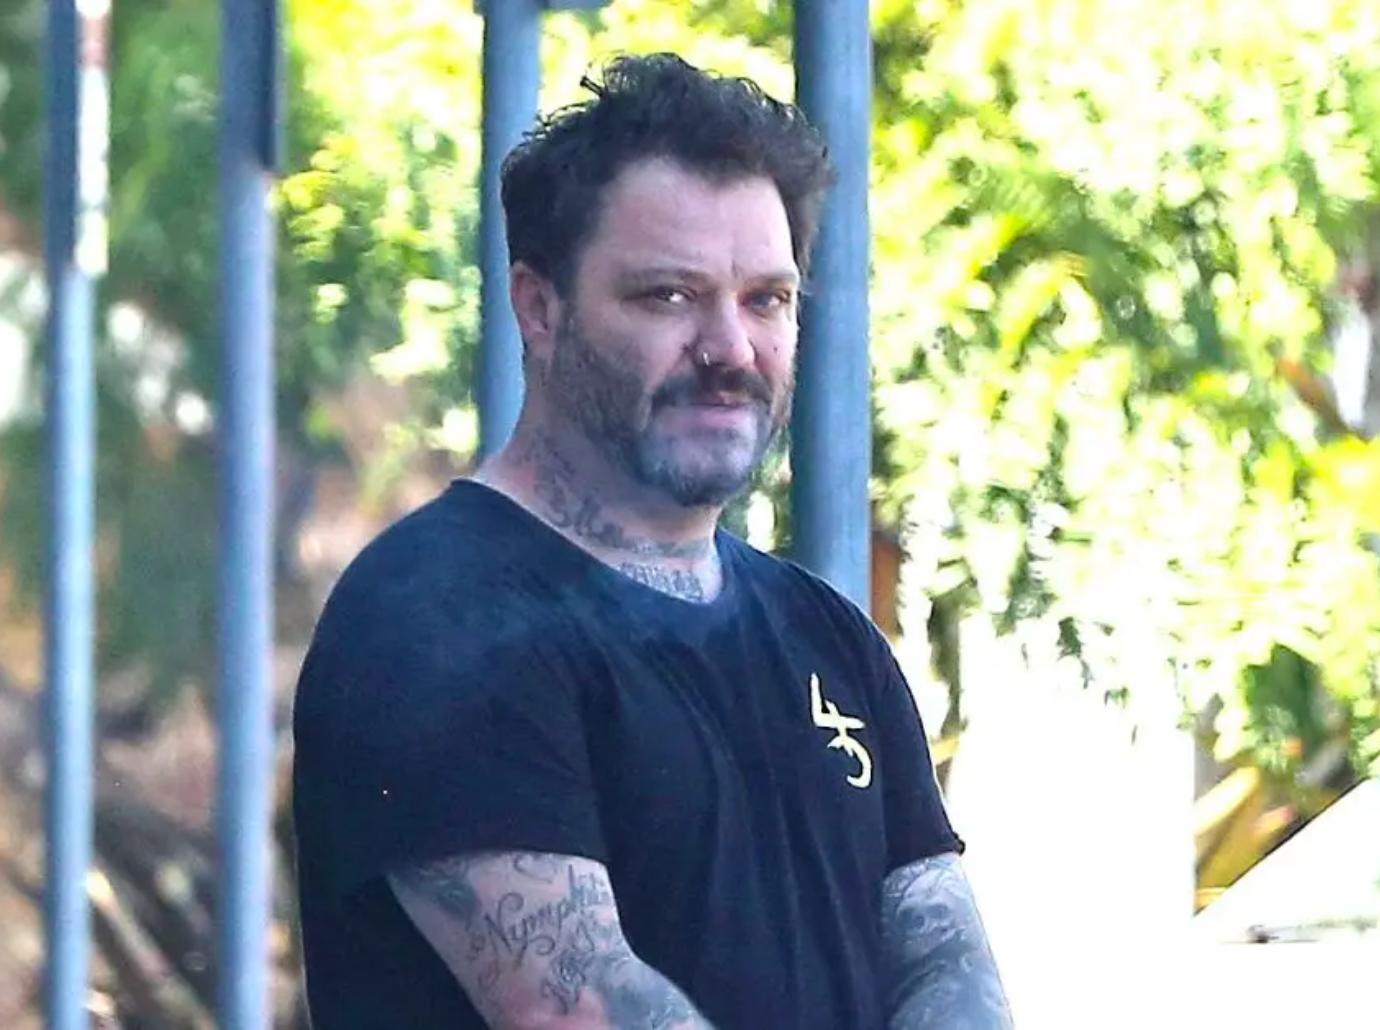 Bam Margera Missing In Pennsylvania Woods, Arrest Warrant Issued pic